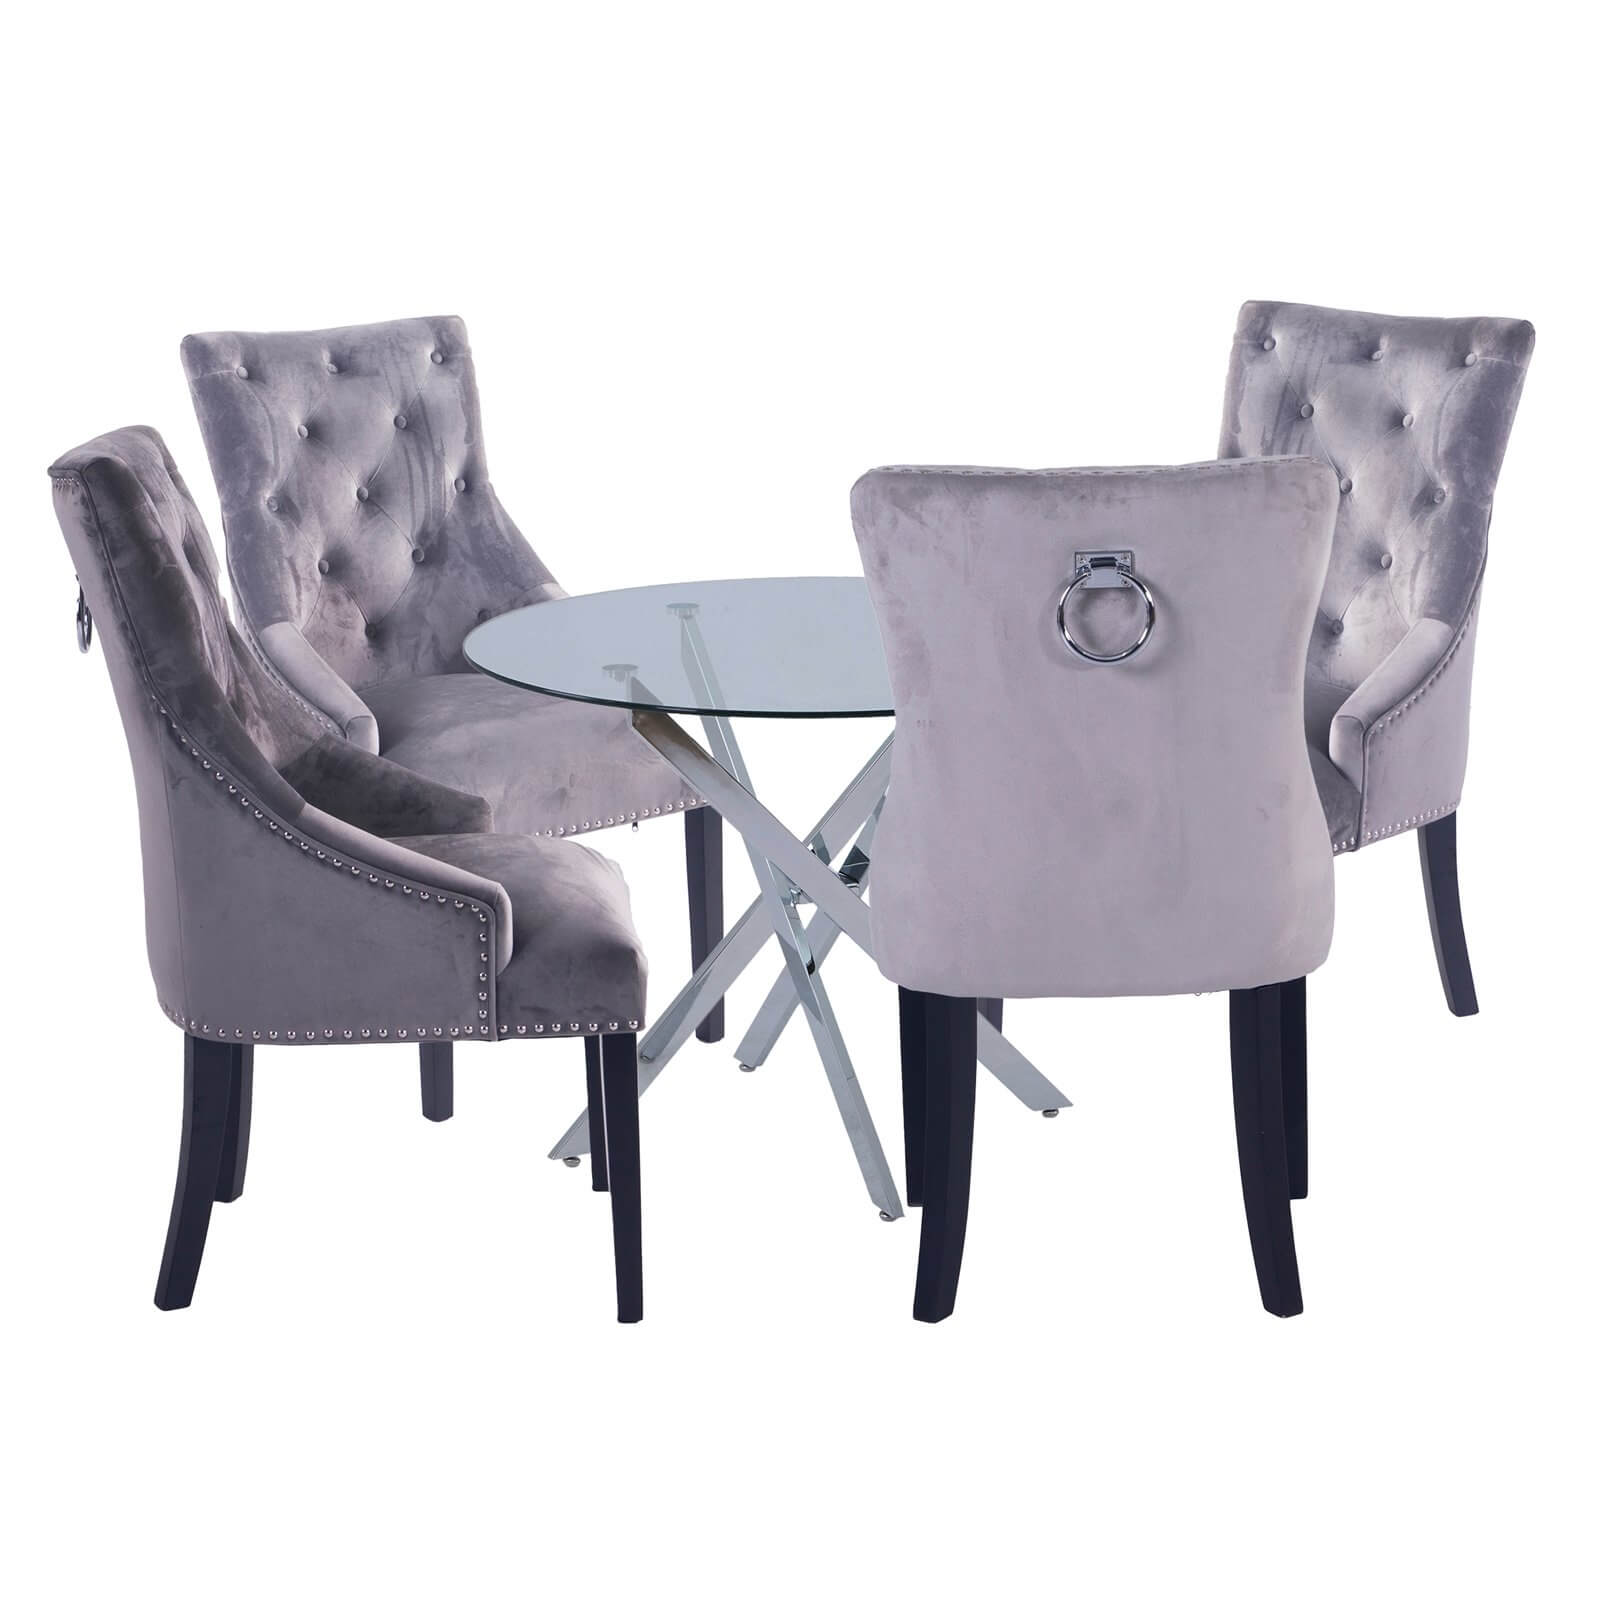 Sloane 4 Seater Dining Set - Annabelle Chairs - Grey